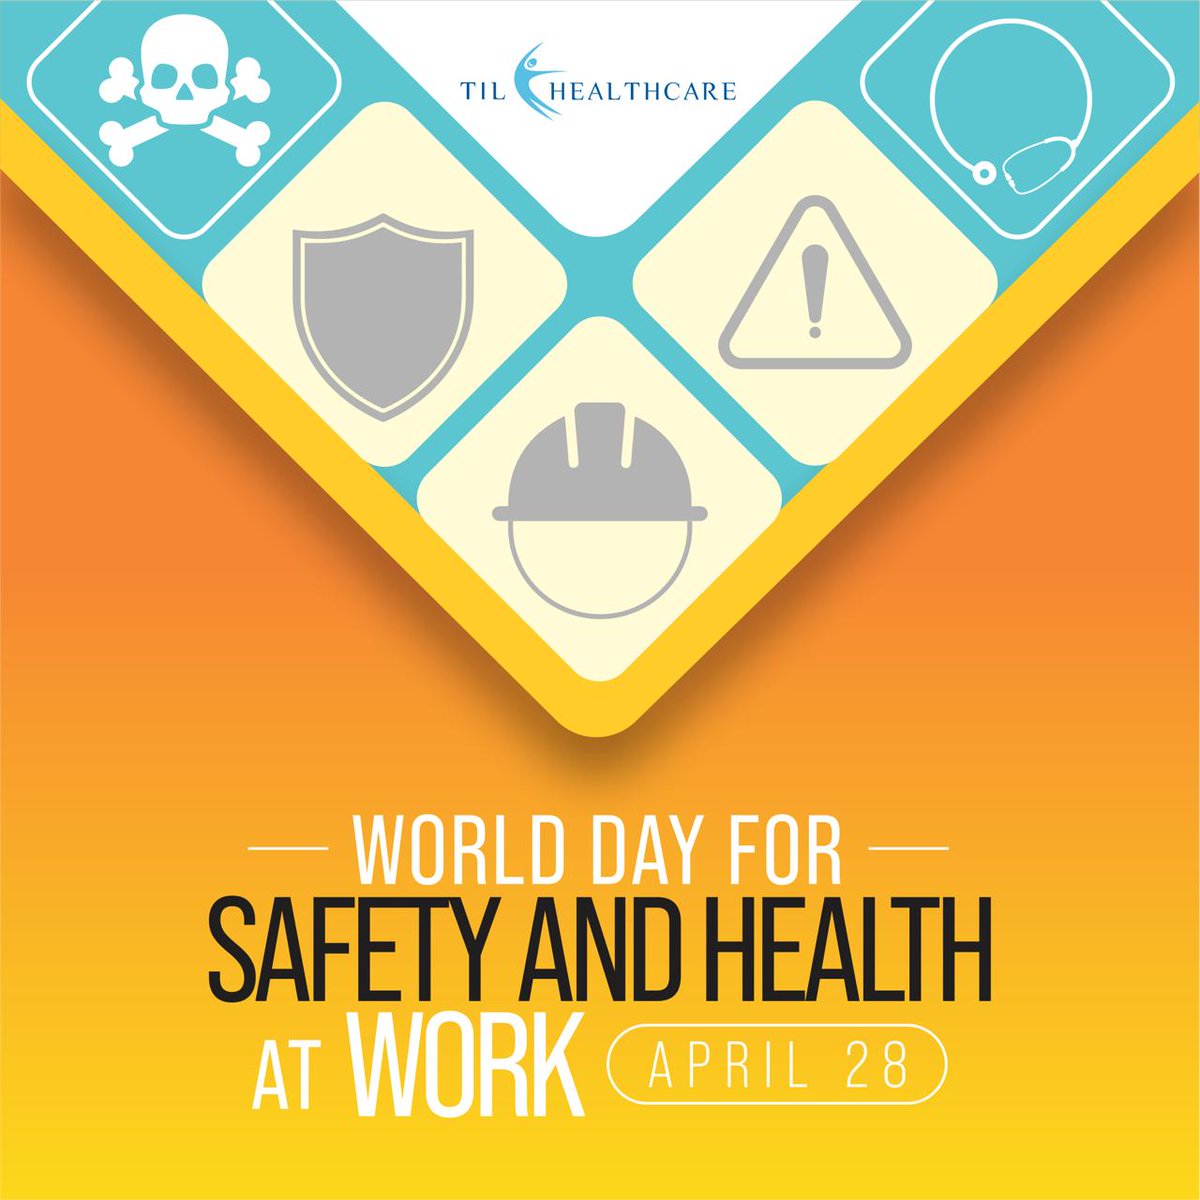 Prioritizing safety at work ensures a healthier, happier workforce. Let's commit to creating safer workplaces for all. #WorldSafetyDay #Tilhealthcare #Safetyatwork #healthymind #Health #work #Pharmacutical #pharmamarketing